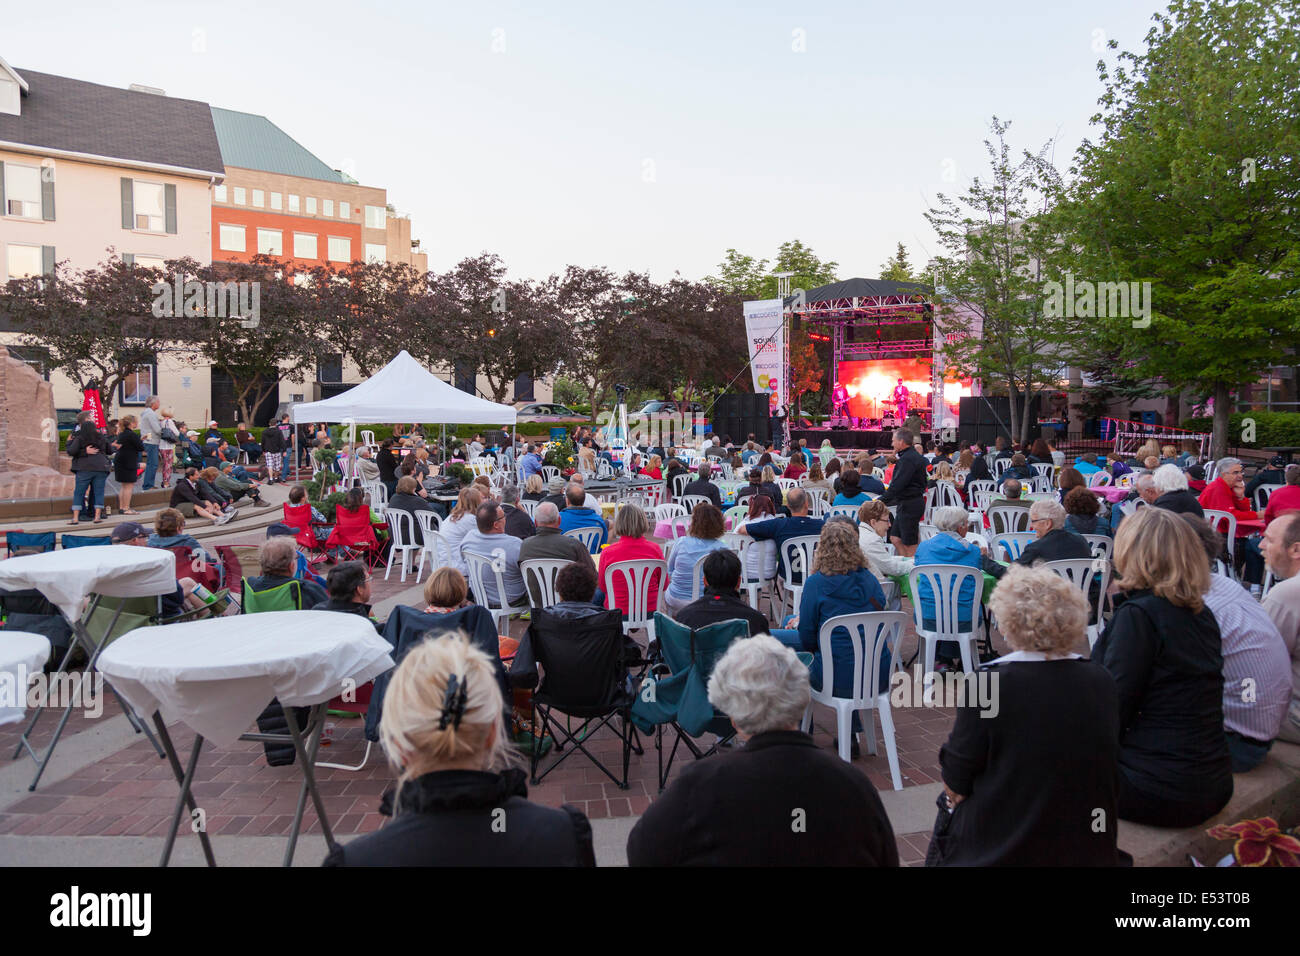 People seated watching a band performing in 'Civic Square' at the 'Sound of Music Festival' at Spencer Smith Park in Burlington, Stock Photo